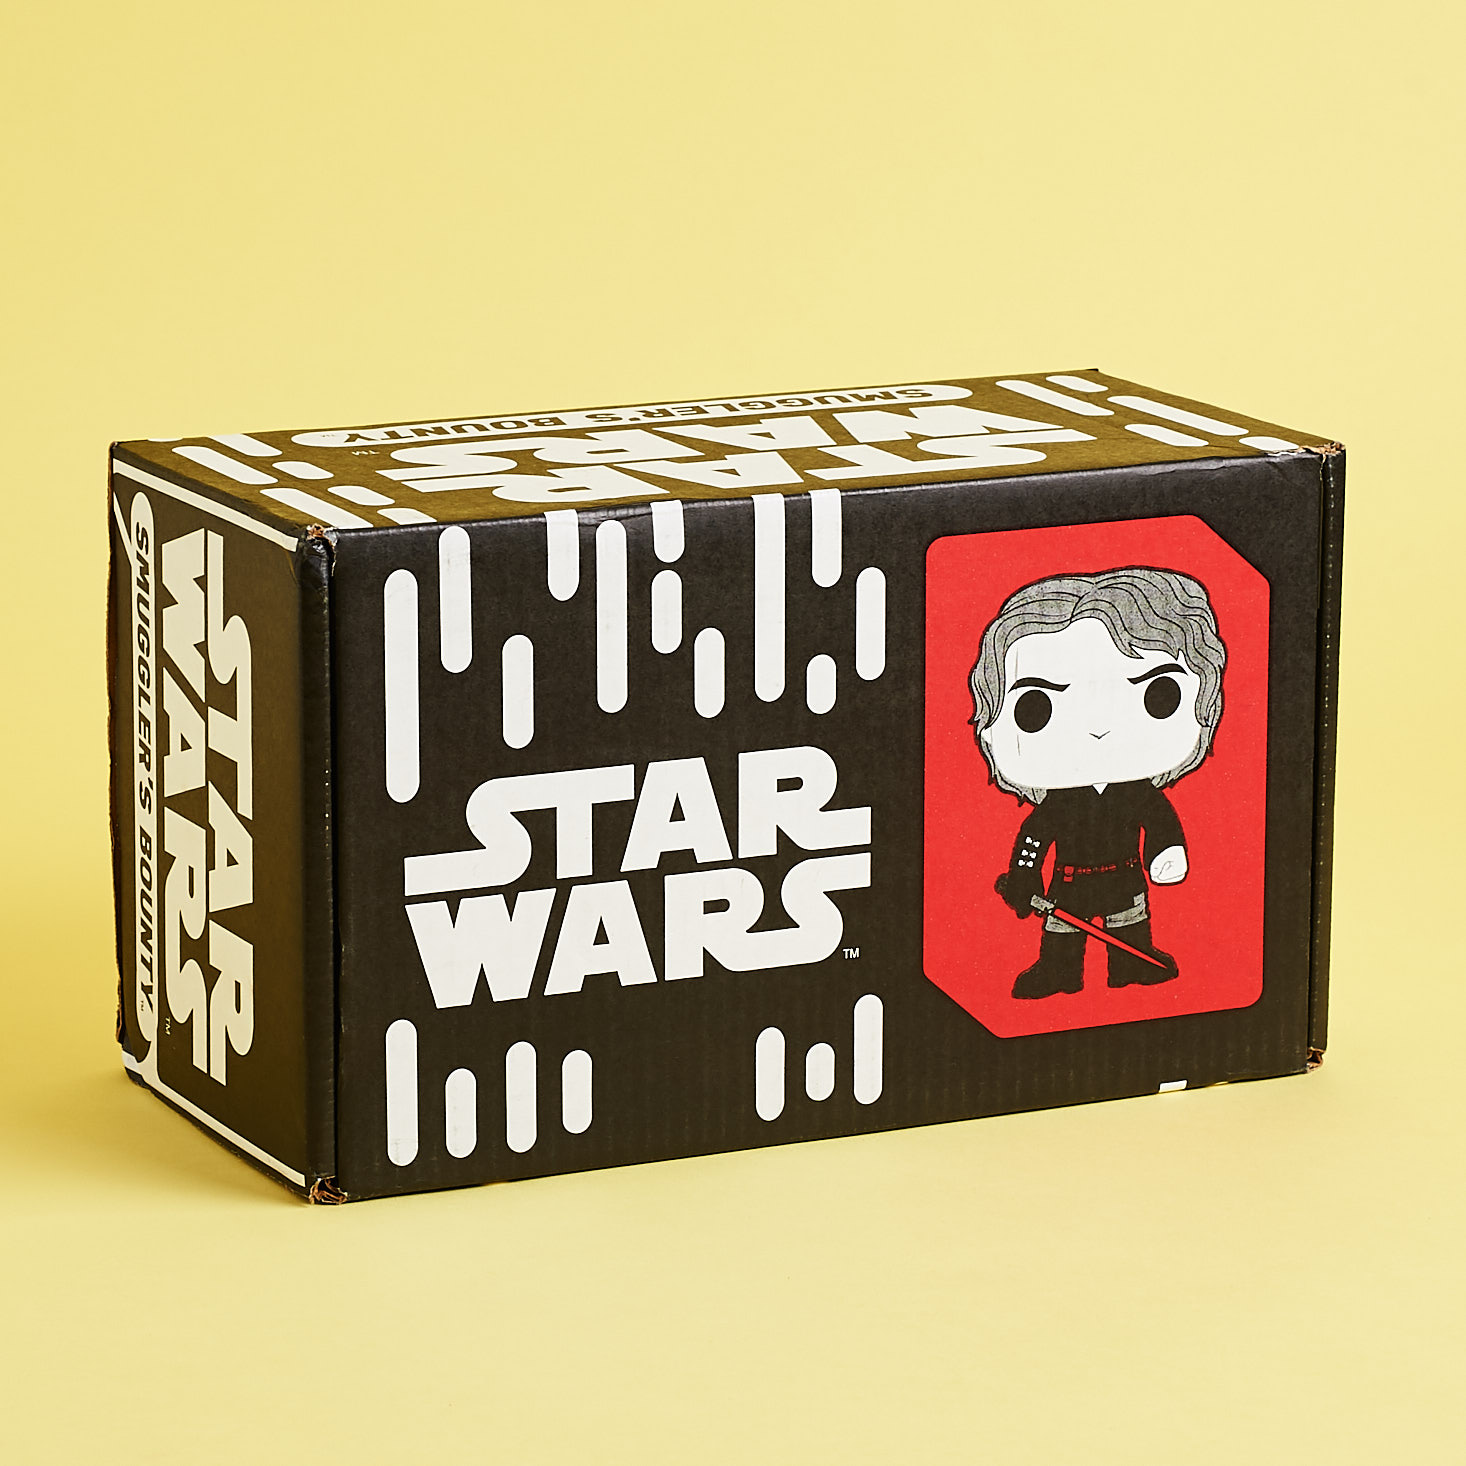 Star Wars Smuggler’s Bounty Box Review – Revenge of the Sith